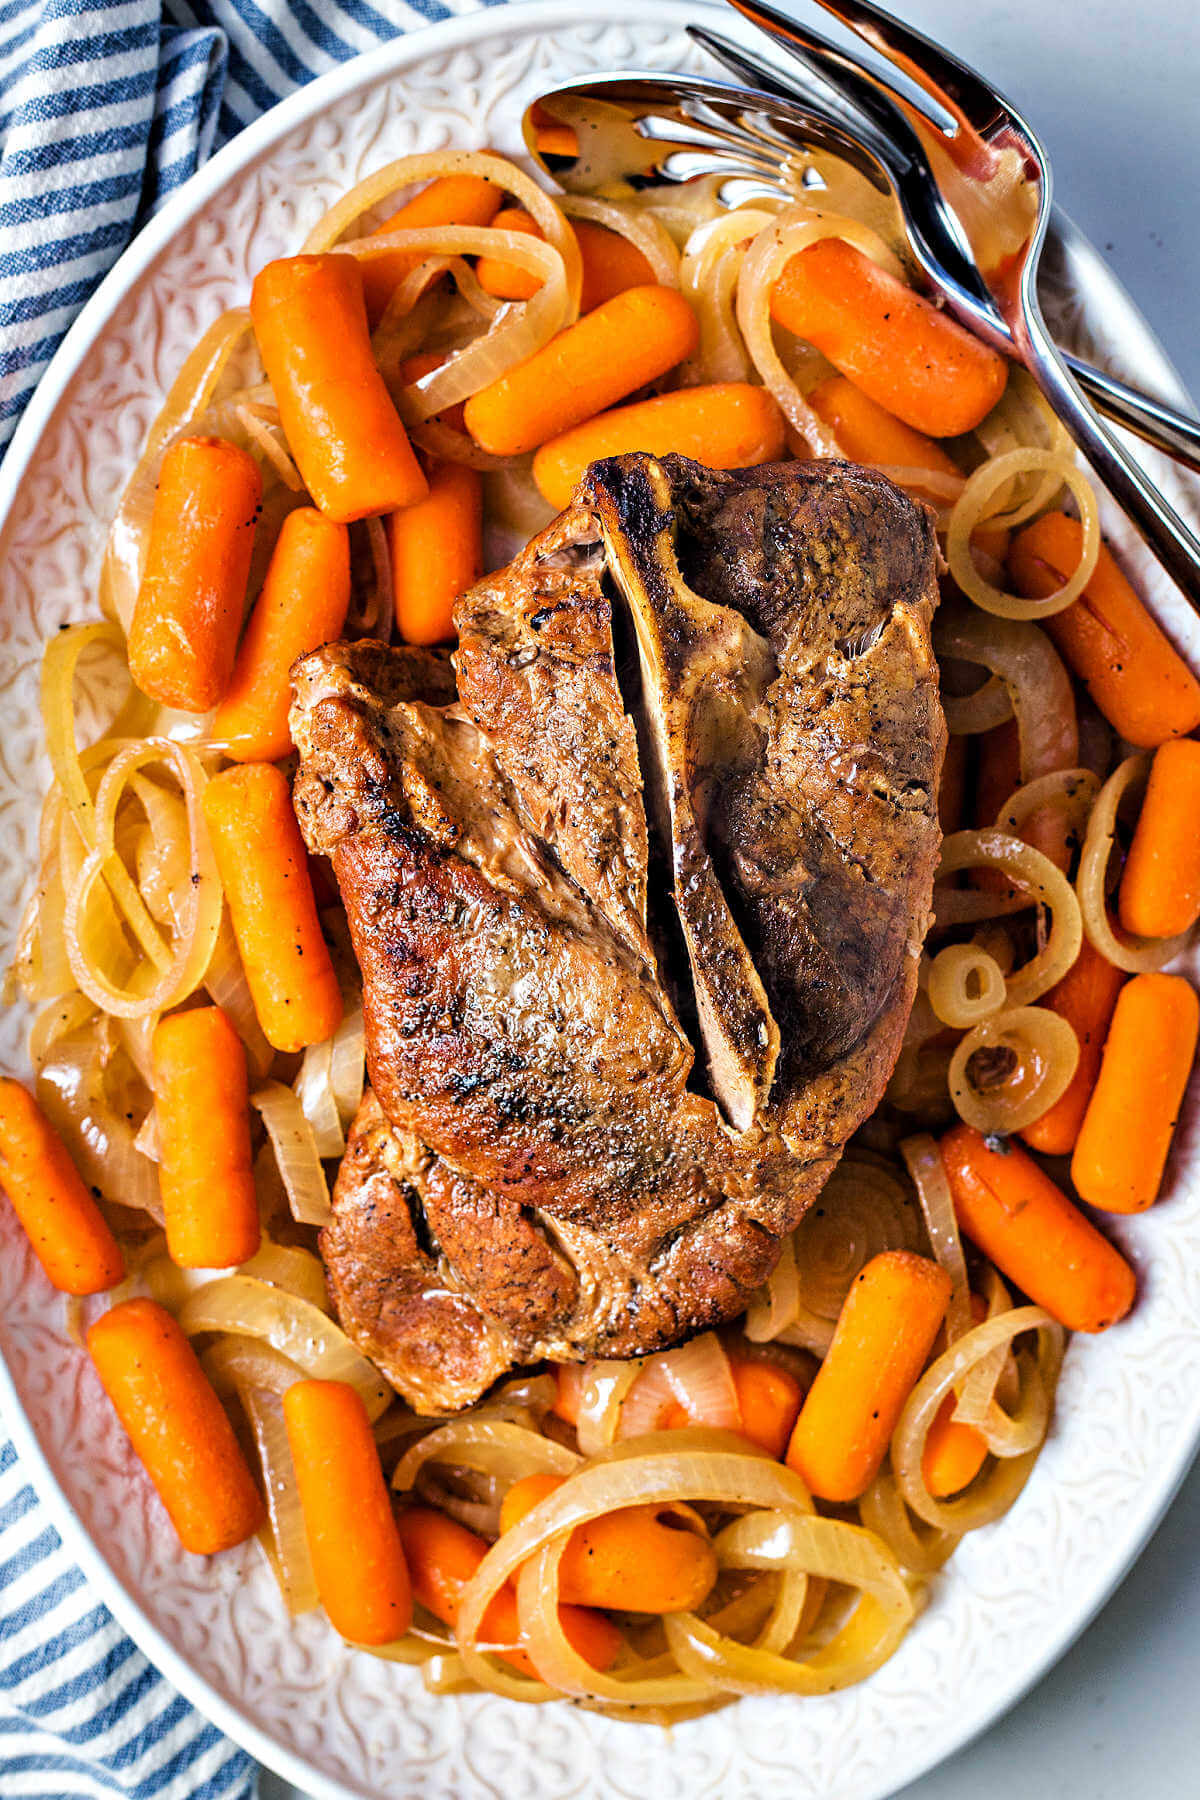 slow cooker pork roast on a platter surrounded by carrots and onions.